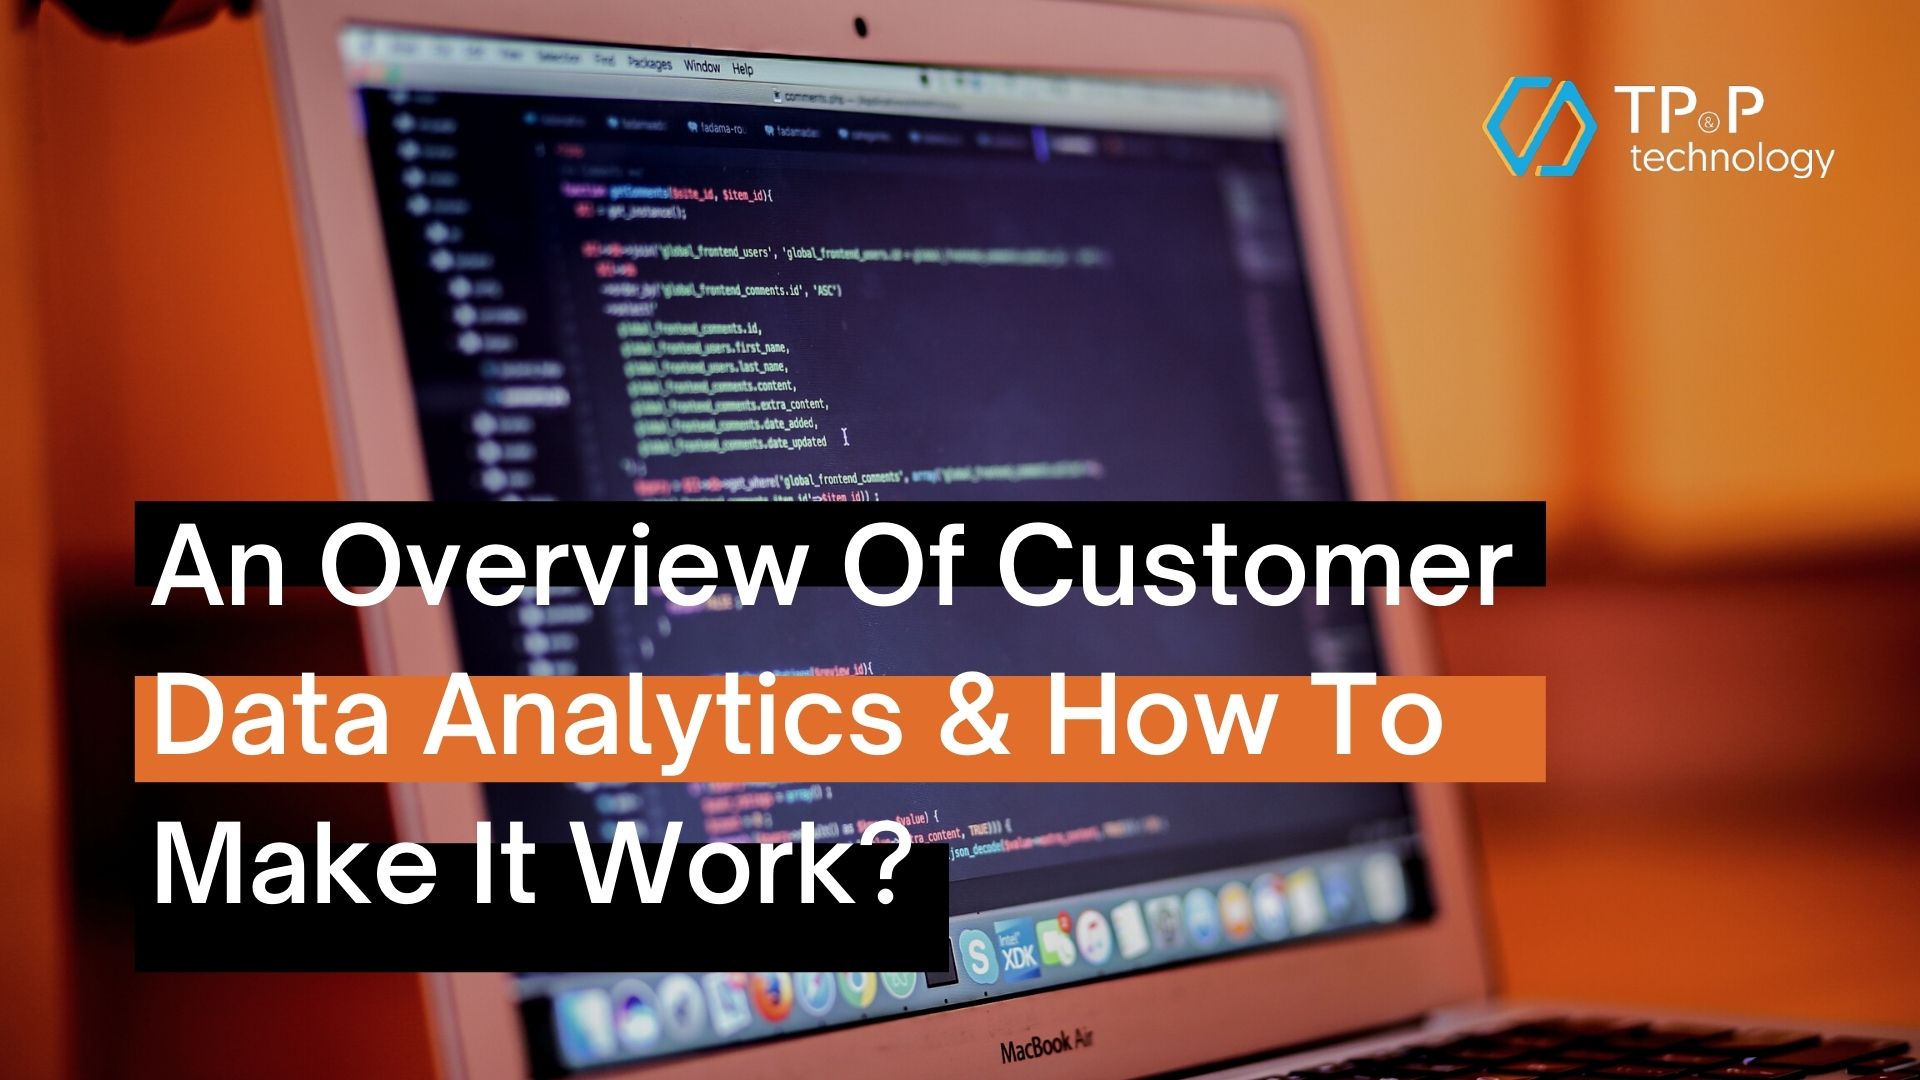 An Overview Of Customer Data Analytics & How To Make It Work